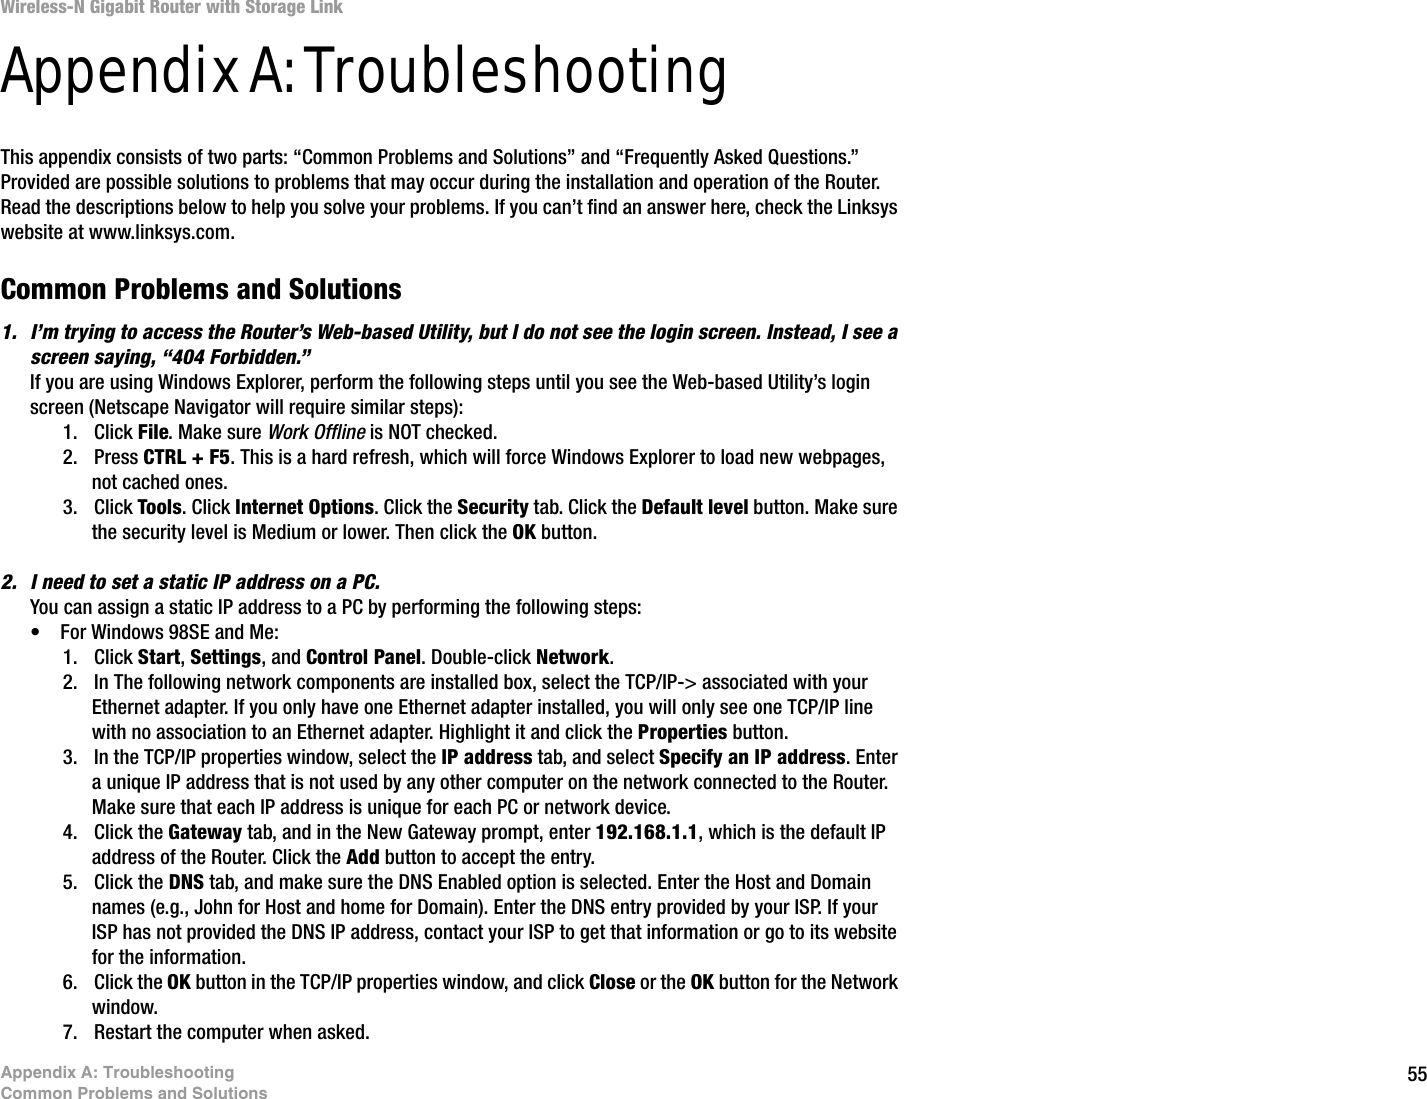 55Appendix A: TroubleshootingCommon Problems and SolutionsWireless-N Gigabit Router with Storage LinkAppendix A: TroubleshootingThis appendix consists of two parts: “Common Problems and Solutions” and “Frequently Asked Questions.” Provided are possible solutions to problems that may occur during the installation and operation of the Router. Read the descriptions below to help you solve your problems. If you can’t find an answer here, check the Linksys website at www.linksys.com.Common Problems and Solutions1. I’m trying to access the Router’s Web-based Utility, but I do not see the login screen. Instead, I see a screen saying, “404 Forbidden.”If you are using Windows Explorer, perform the following steps until you see the Web-based Utility’s login screen (Netscape Navigator will require similar steps):1. Click File. Make sure Work Offline is NOT checked.2. Press CTRL + F5. This is a hard refresh, which will force Windows Explorer to load new webpages, not cached ones.3. Click Tools. Click Internet Options. Click the Security tab. Click the Default level button. Make sure the security level is Medium or lower. Then click the OK button.2. I need to set a static IP address on a PC.You can assign a static IP address to a PC by performing the following steps:• For Windows 98SE and Me:1. Click Start, Settings, and Control Panel. Double-click Network.2. In The following network components are installed box, select the TCP/IP-&gt; associated with your Ethernet adapter. If you only have one Ethernet adapter installed, you will only see one TCP/IP line with no association to an Ethernet adapter. Highlight it and click the Properties button.3. In the TCP/IP properties window, select the IP address tab, and select Specify an IP address. Enter a unique IP address that is not used by any other computer on the network connected to the Router. Make sure that each IP address is unique for each PC or network device.4. Click the Gateway tab, and in the New Gateway prompt, enter 192.168.1.1, which is the default IP address of the Router. Click the Add button to accept the entry.5. Click the DNS tab, and make sure the DNS Enabled option is selected. Enter the Host and Domain names (e.g., John for Host and home for Domain). Enter the DNS entry provided by your ISP. If your ISP has not provided the DNS IP address, contact your ISP to get that information or go to its website for the information.6. Click the OK button in the TCP/IP properties window, and click Close or the OK button for the Network window.7. Restart the computer when asked.